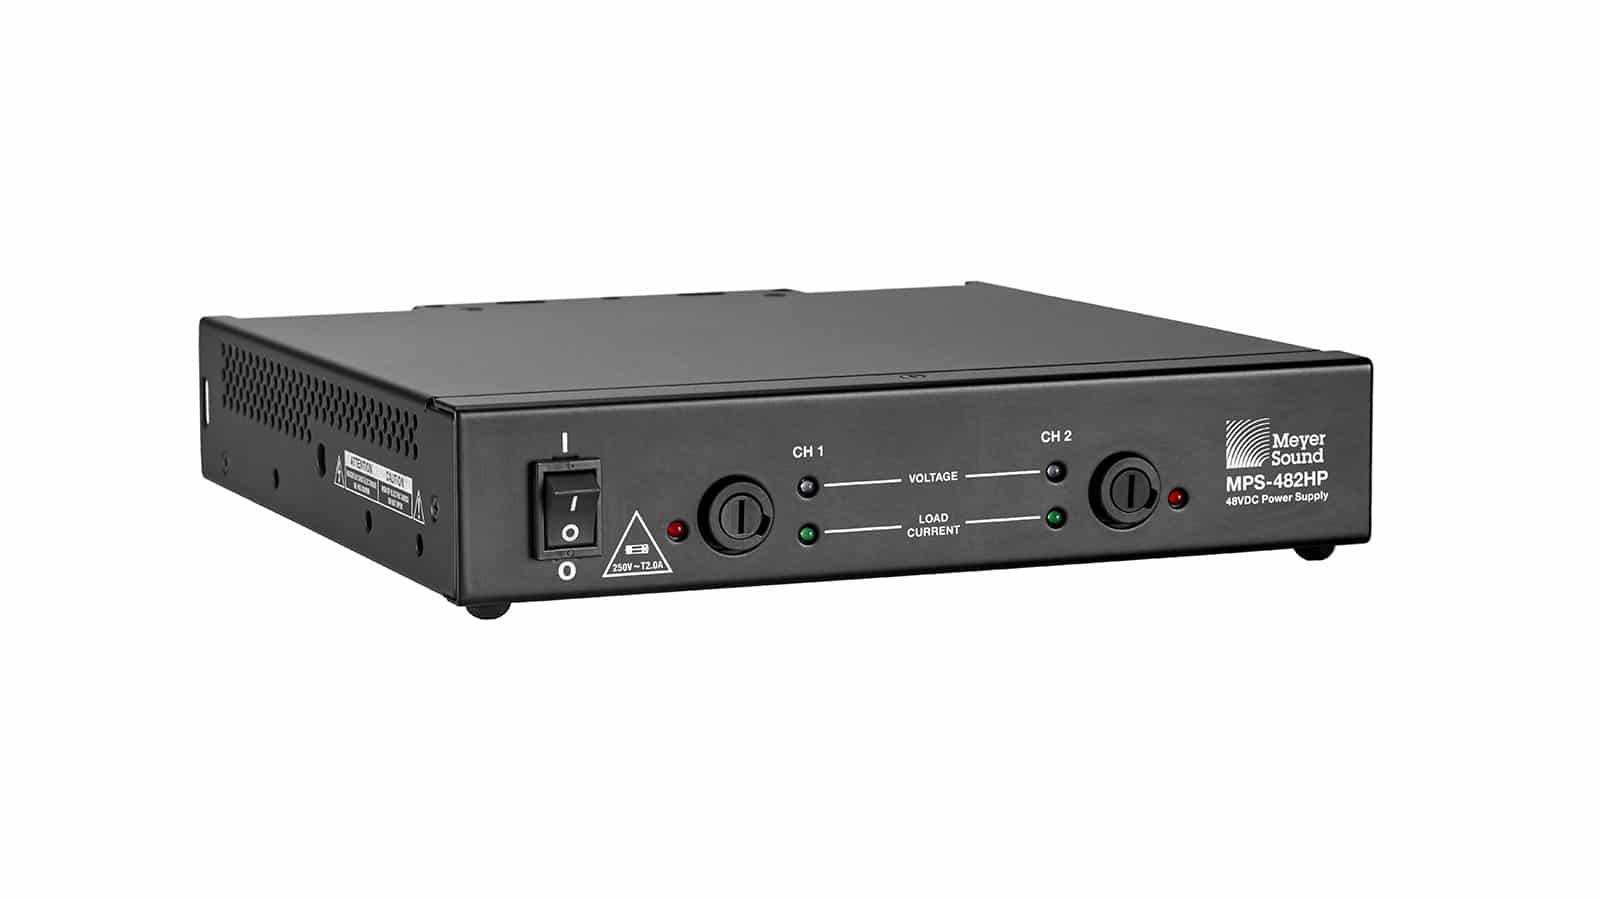 MPS-482HP Power Supply